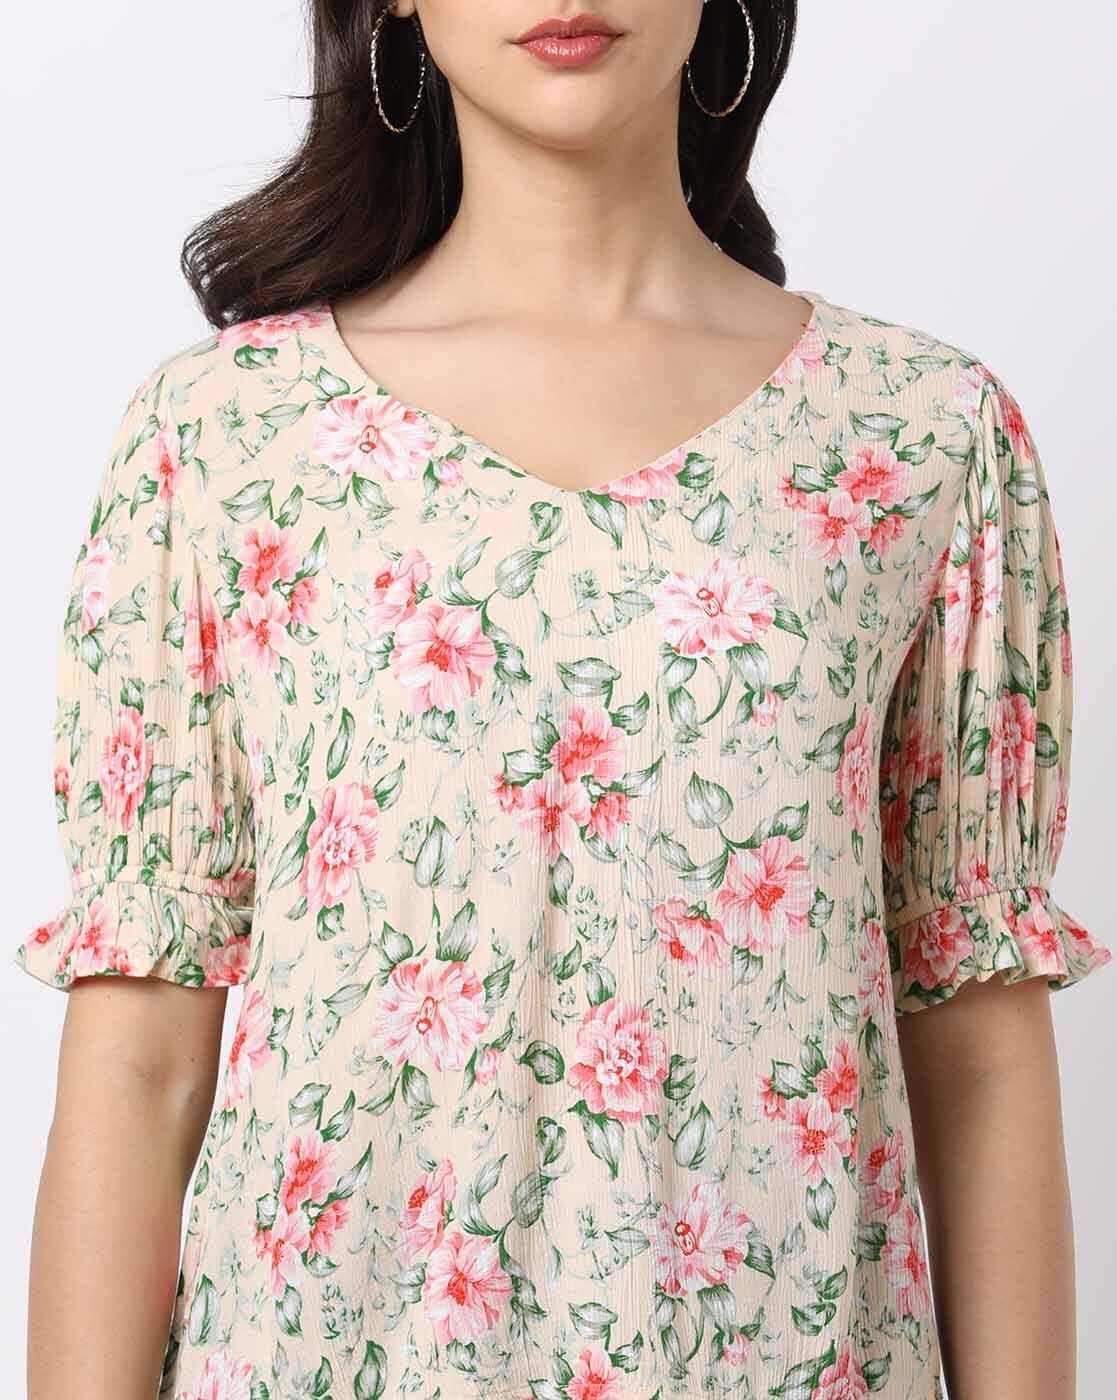 Buy All About You Beige Floral Printed Top - Tops for Women 993785